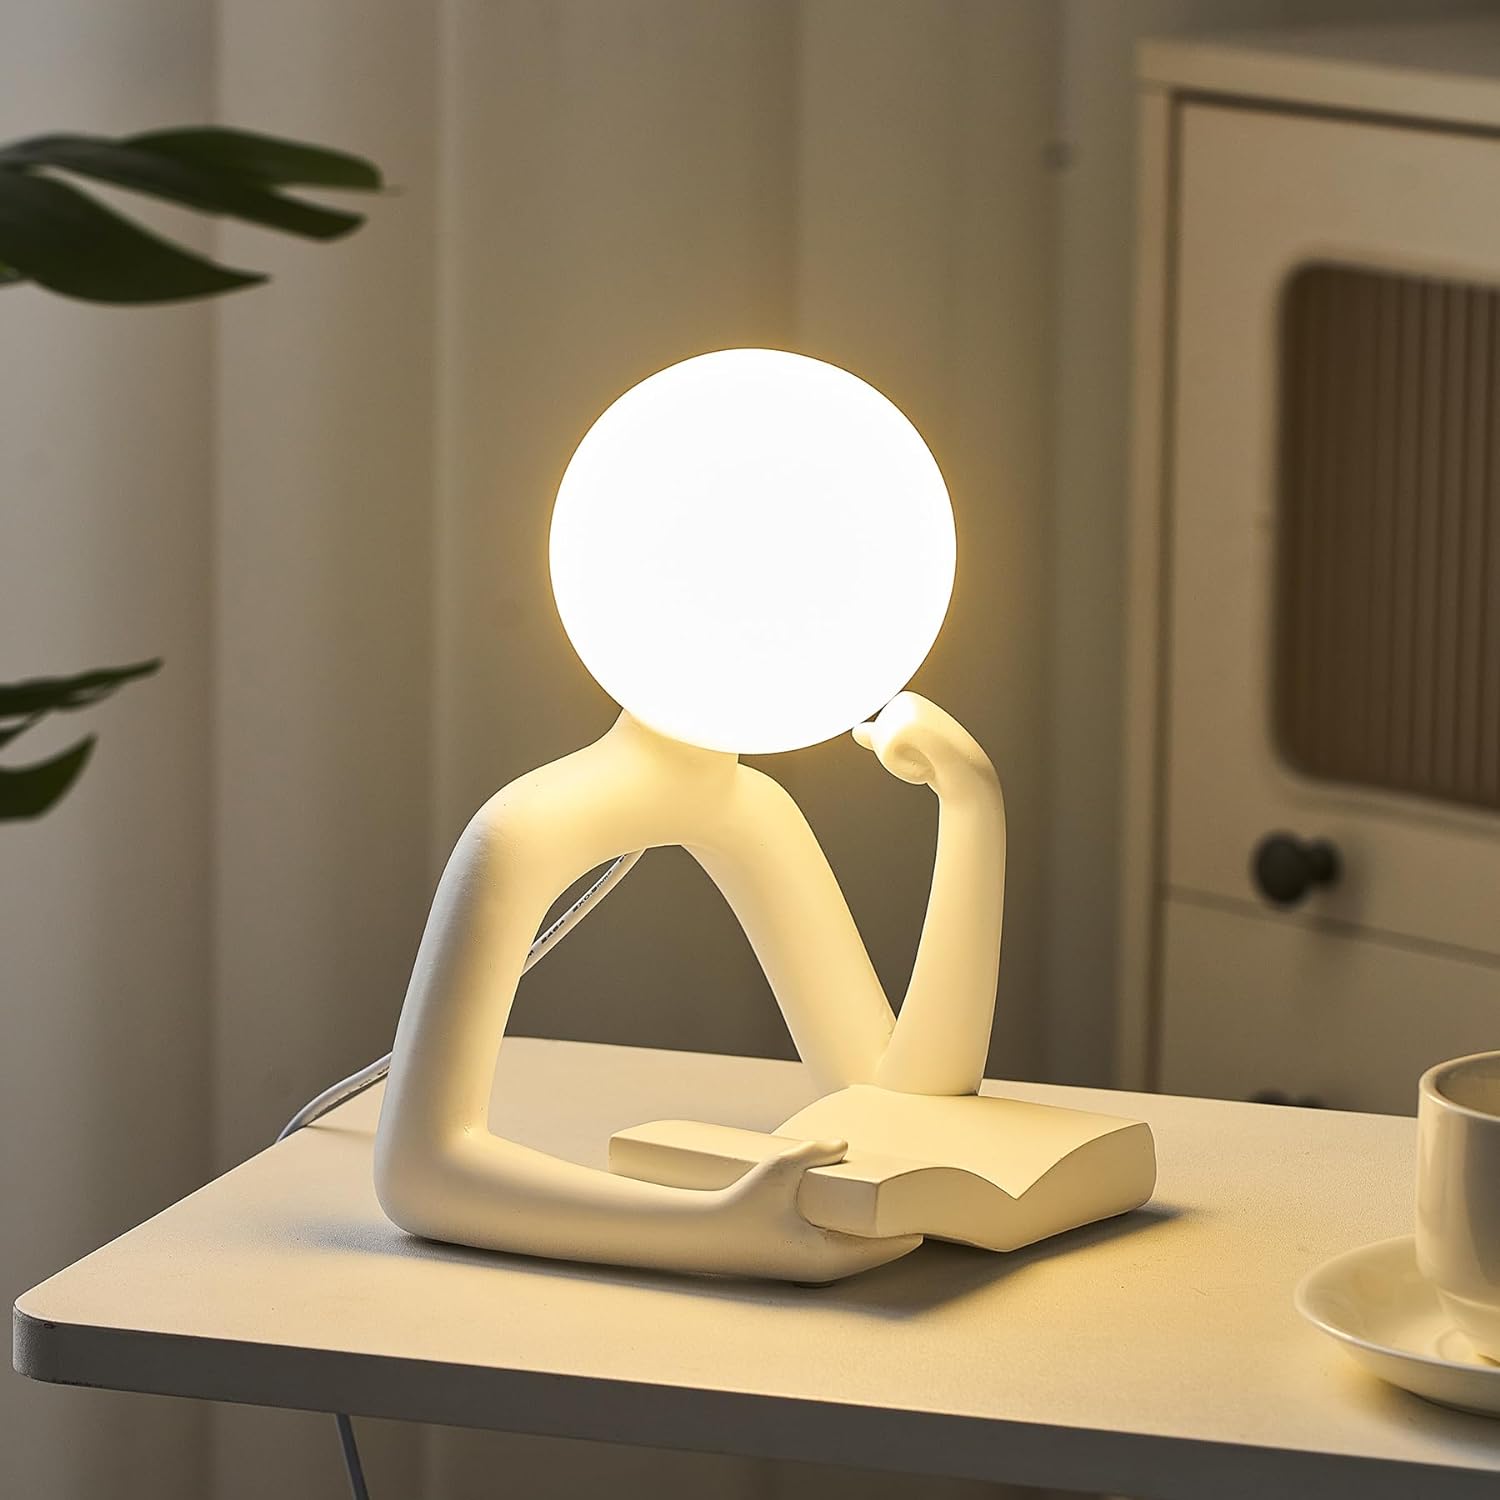 Product Of The Week: Thinker Night Light